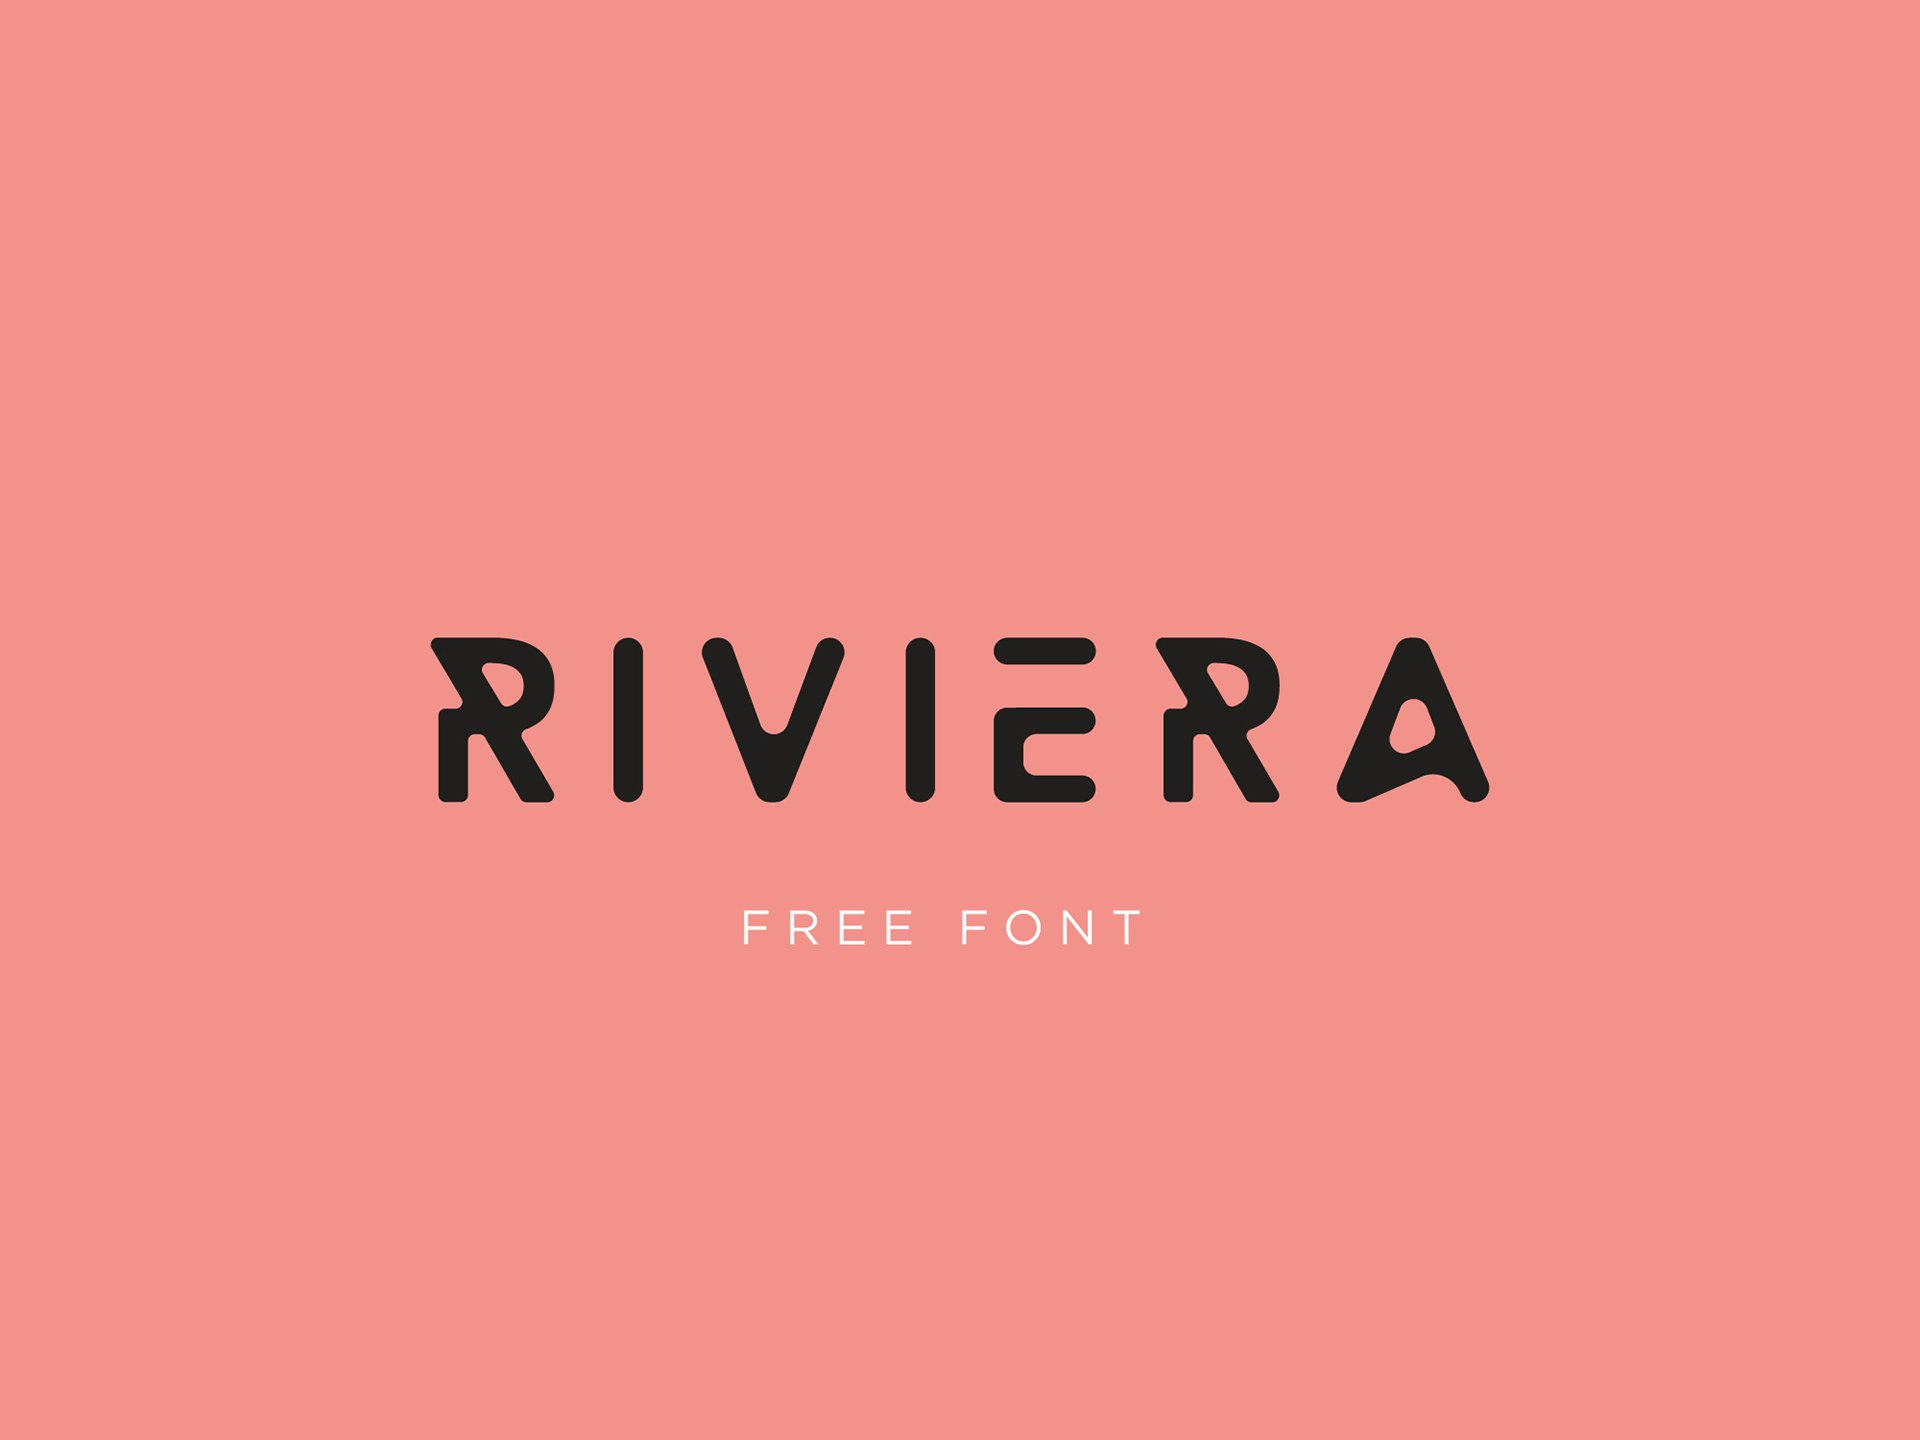 Example font Riviera #1